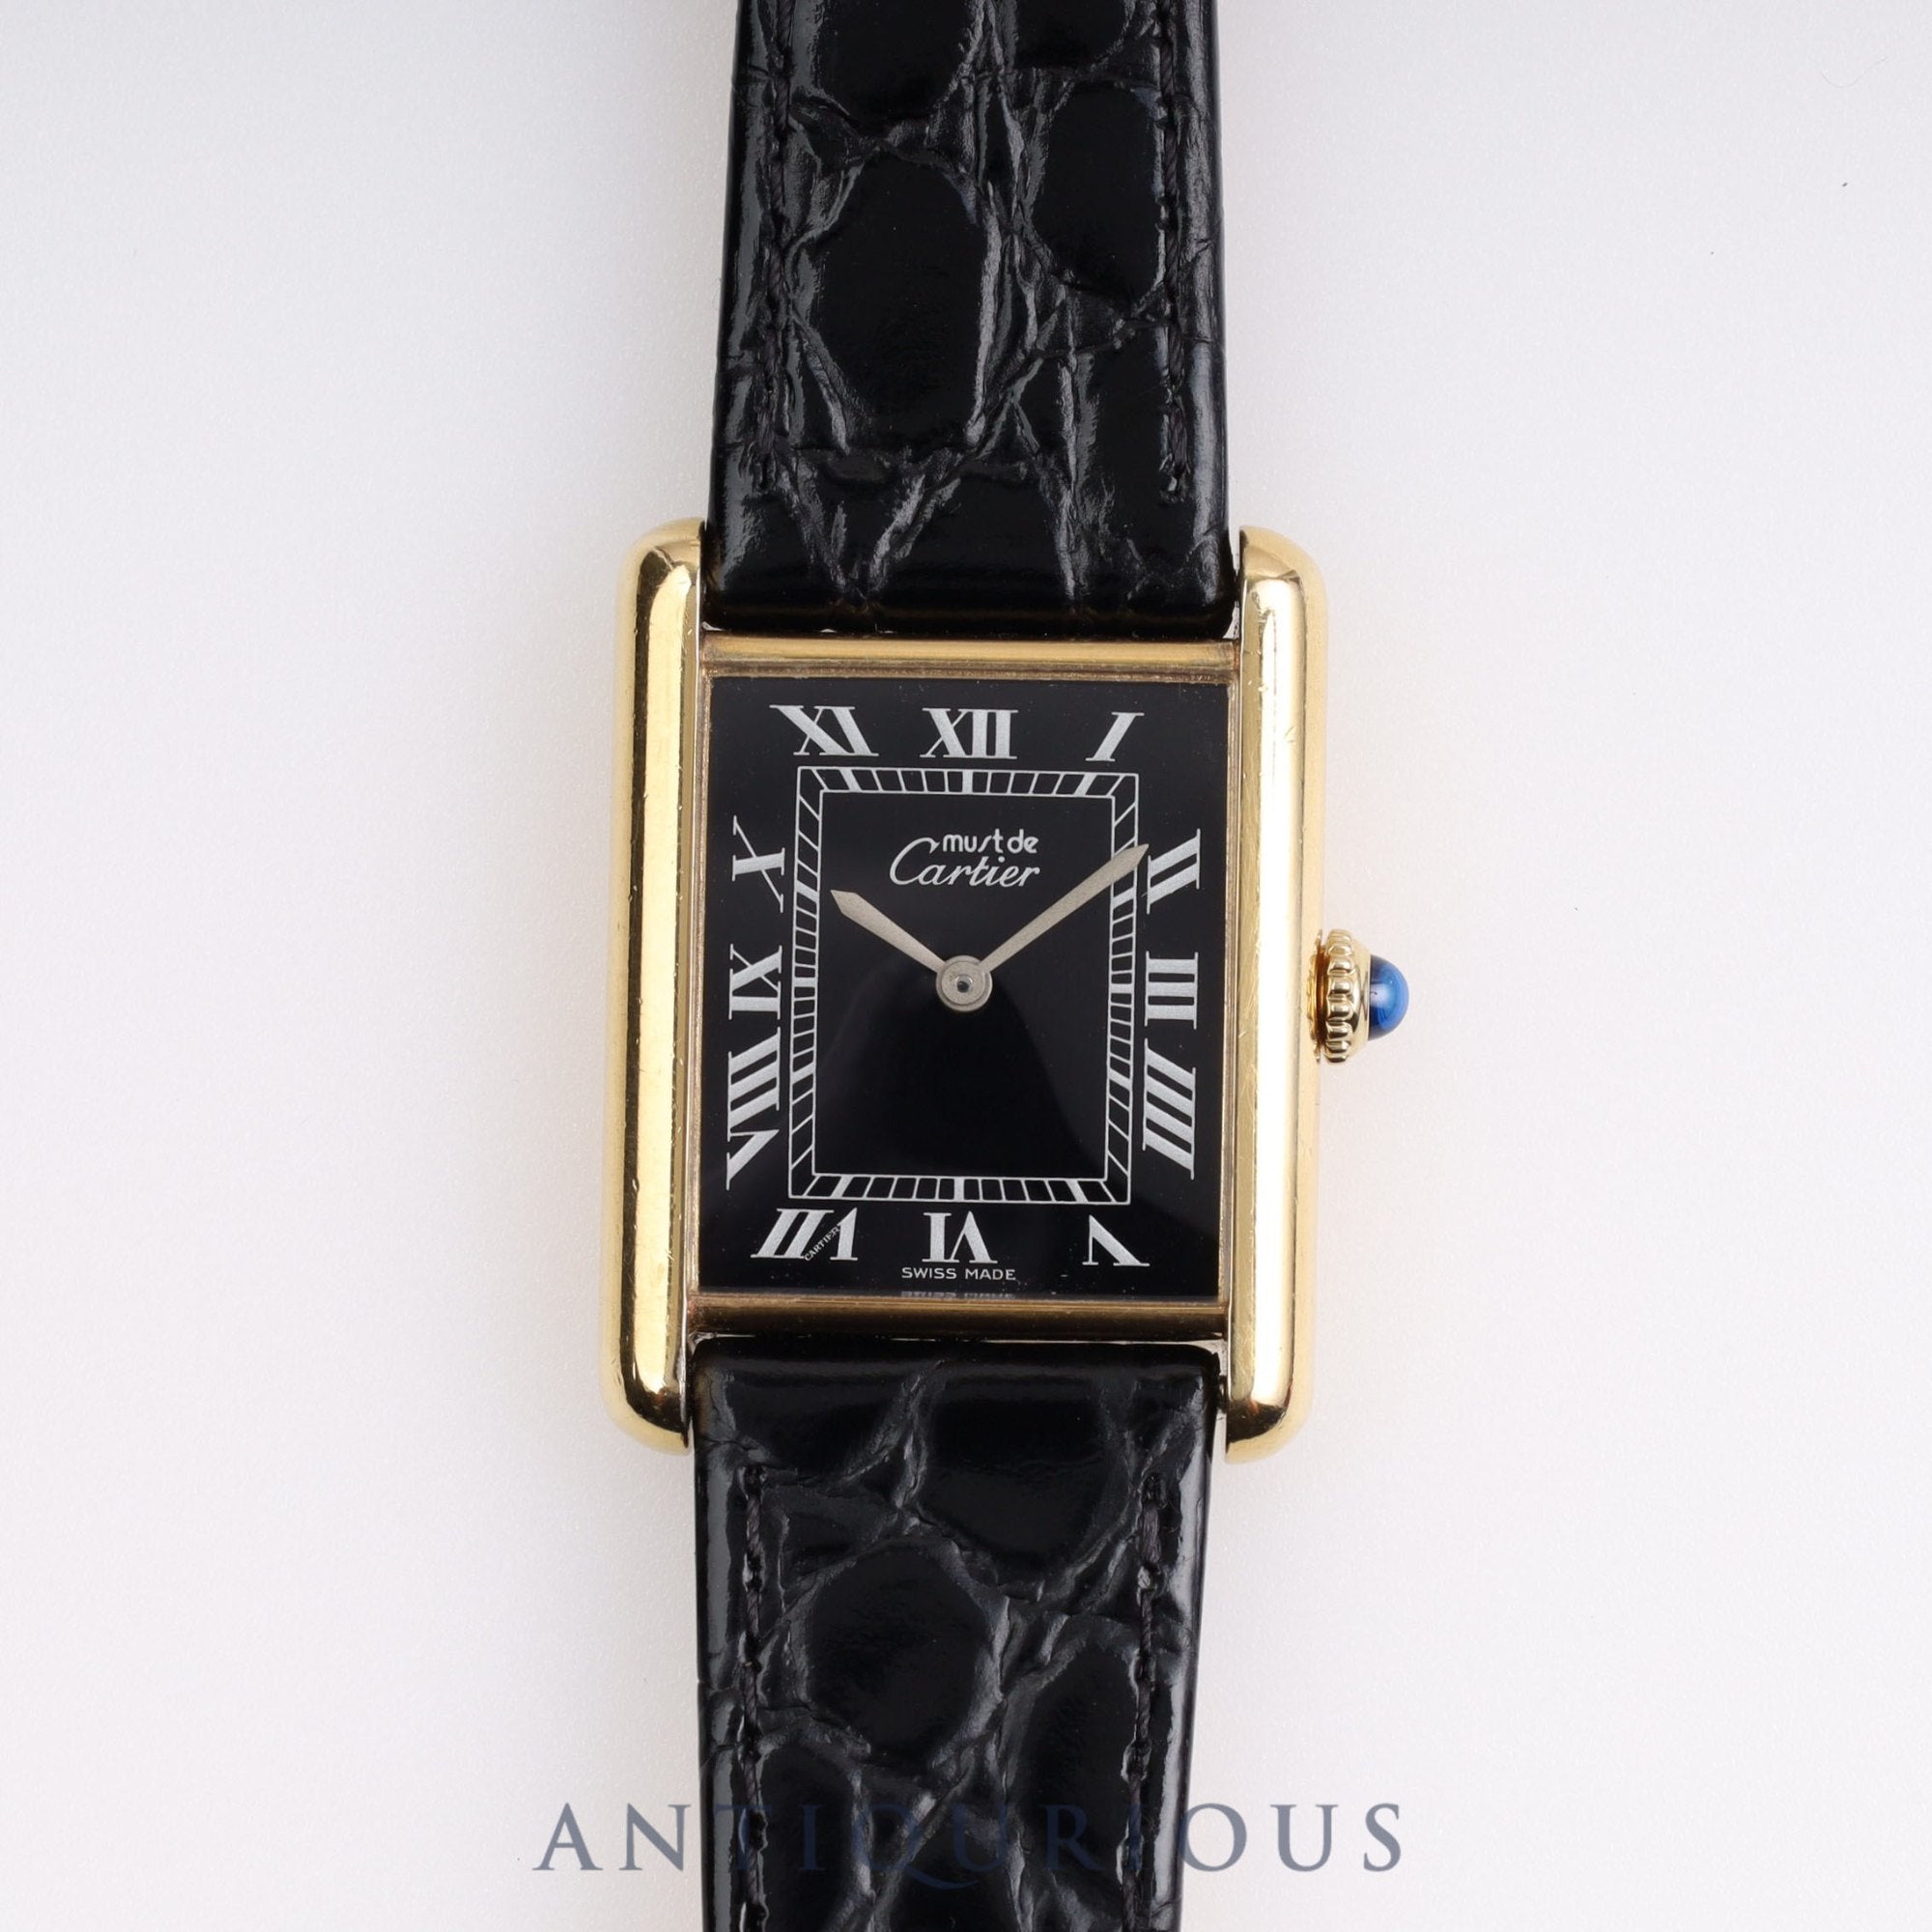 CARTIER Must Tank LM Manual winding Black Roman dial Box Fully maintained